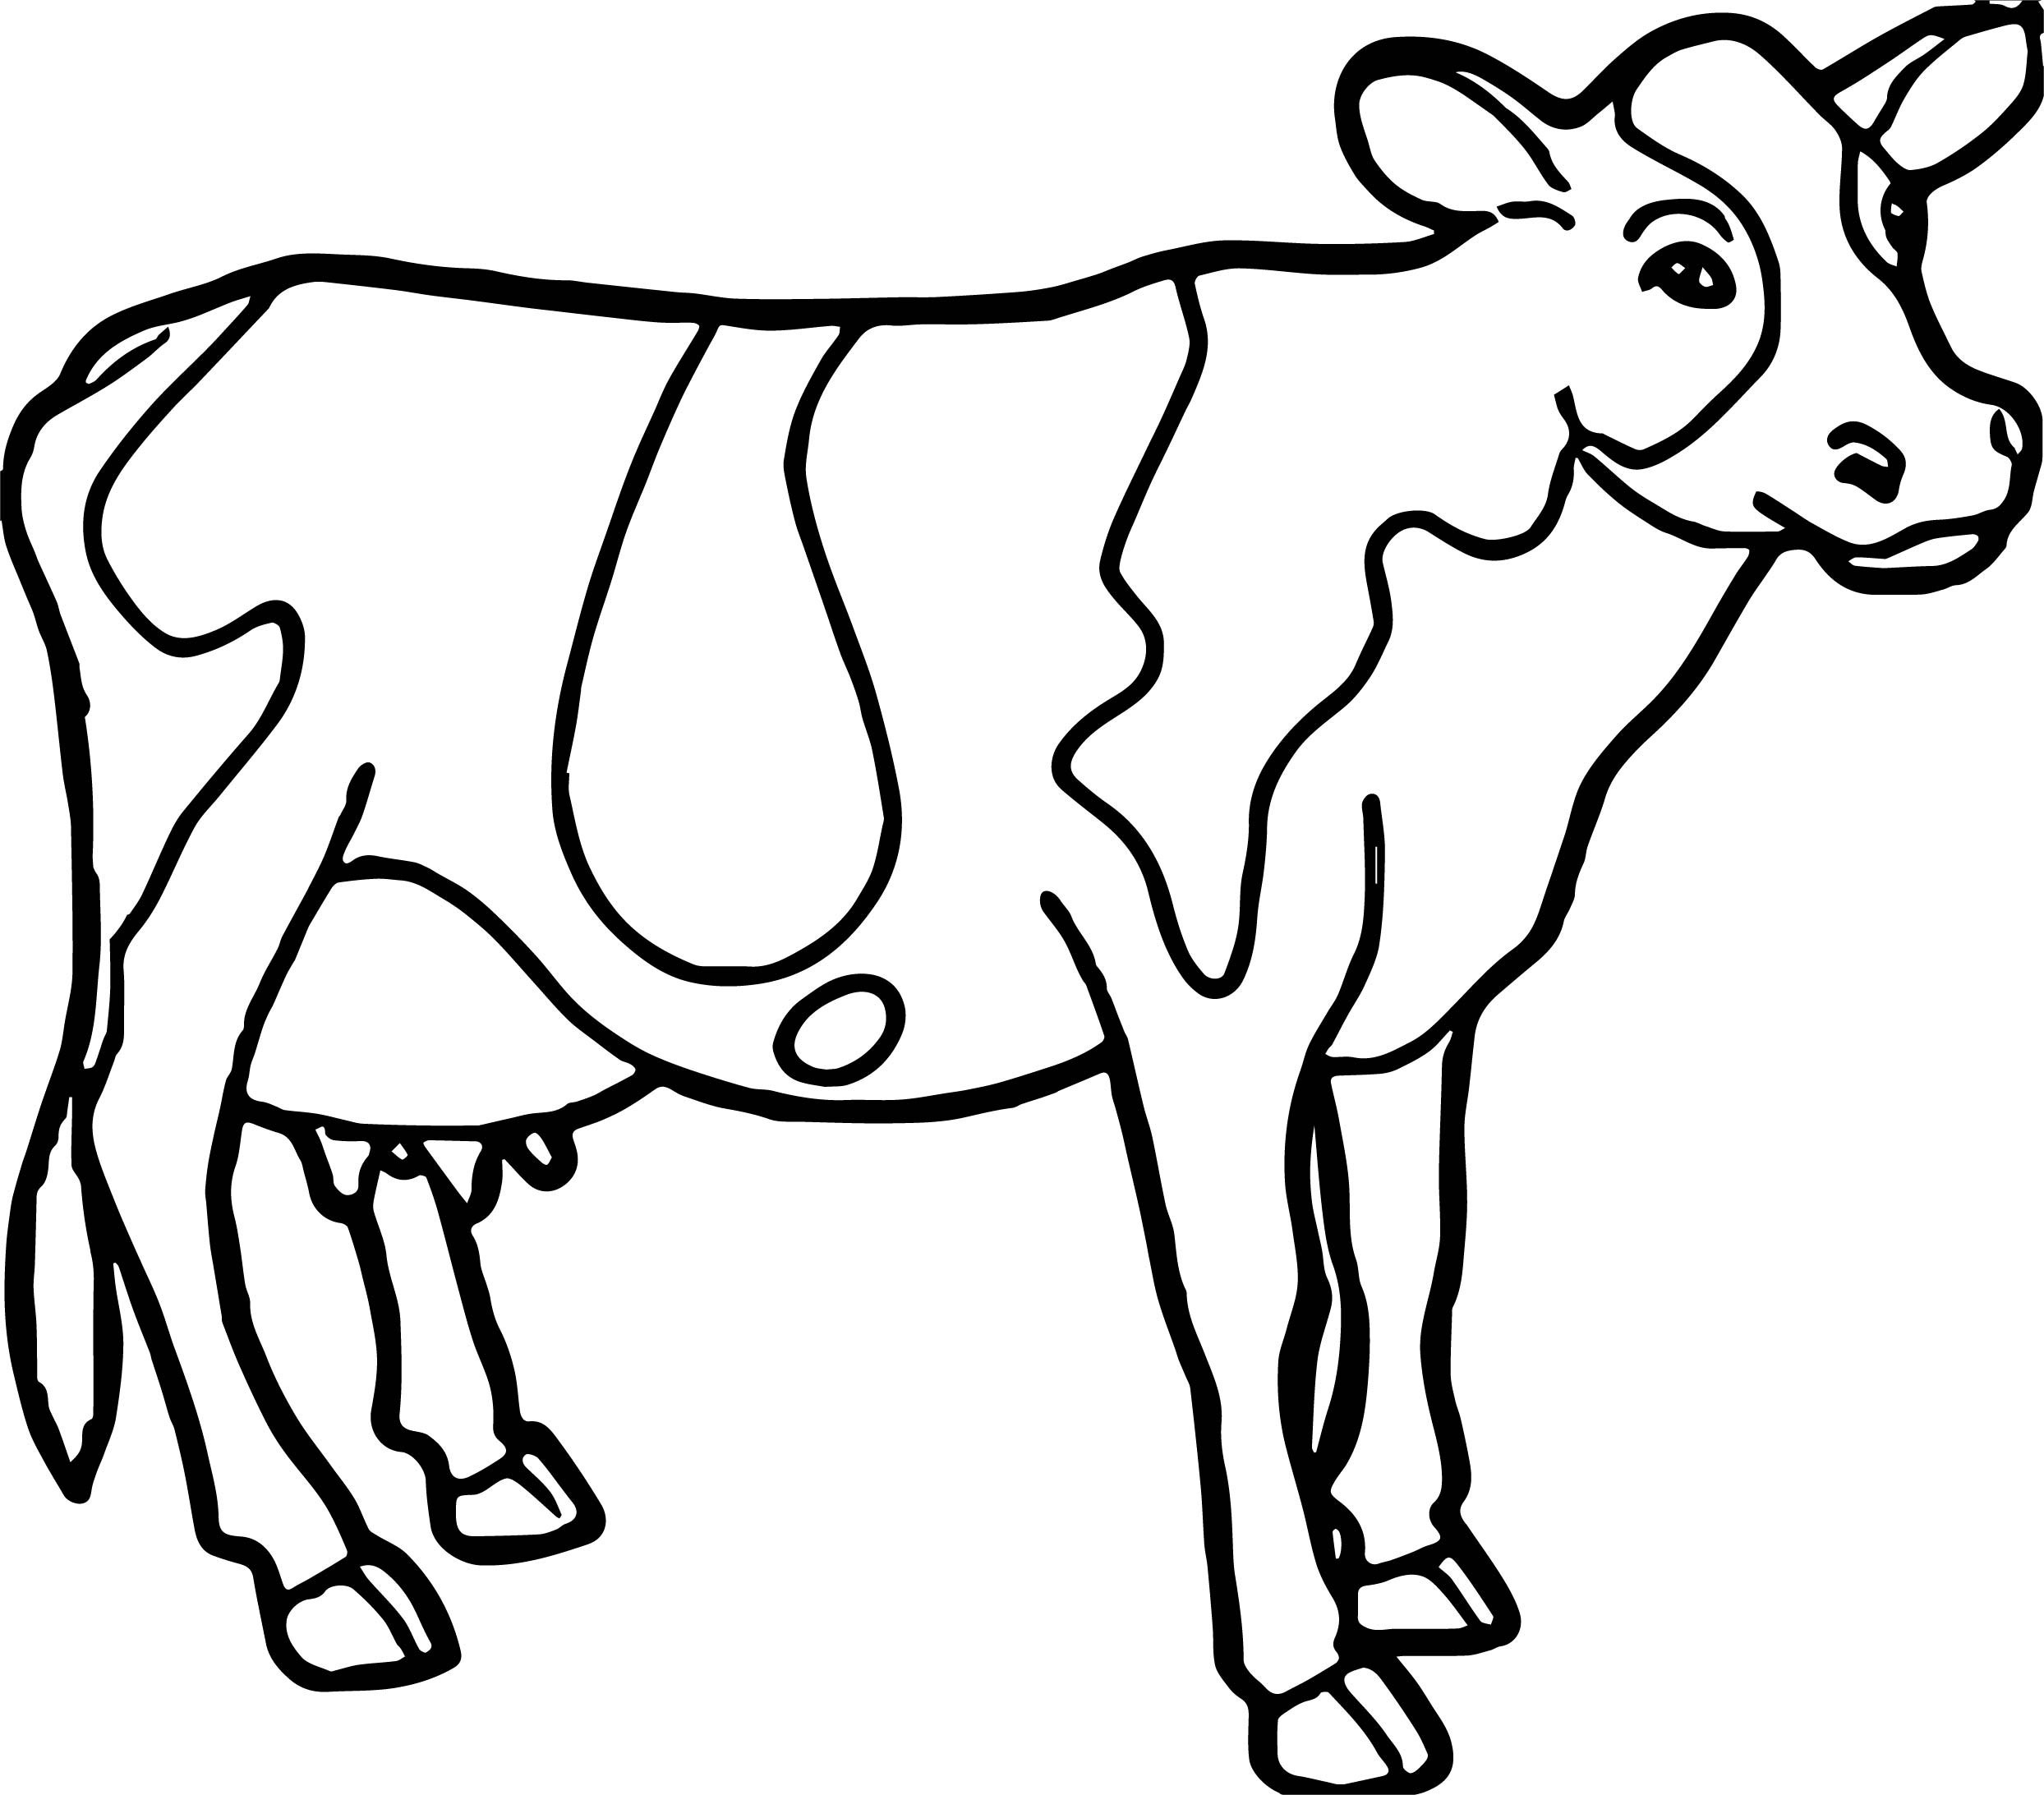 Cow Coloring Pages Free Printable
 Cow Face Coloring Pages at GetColorings